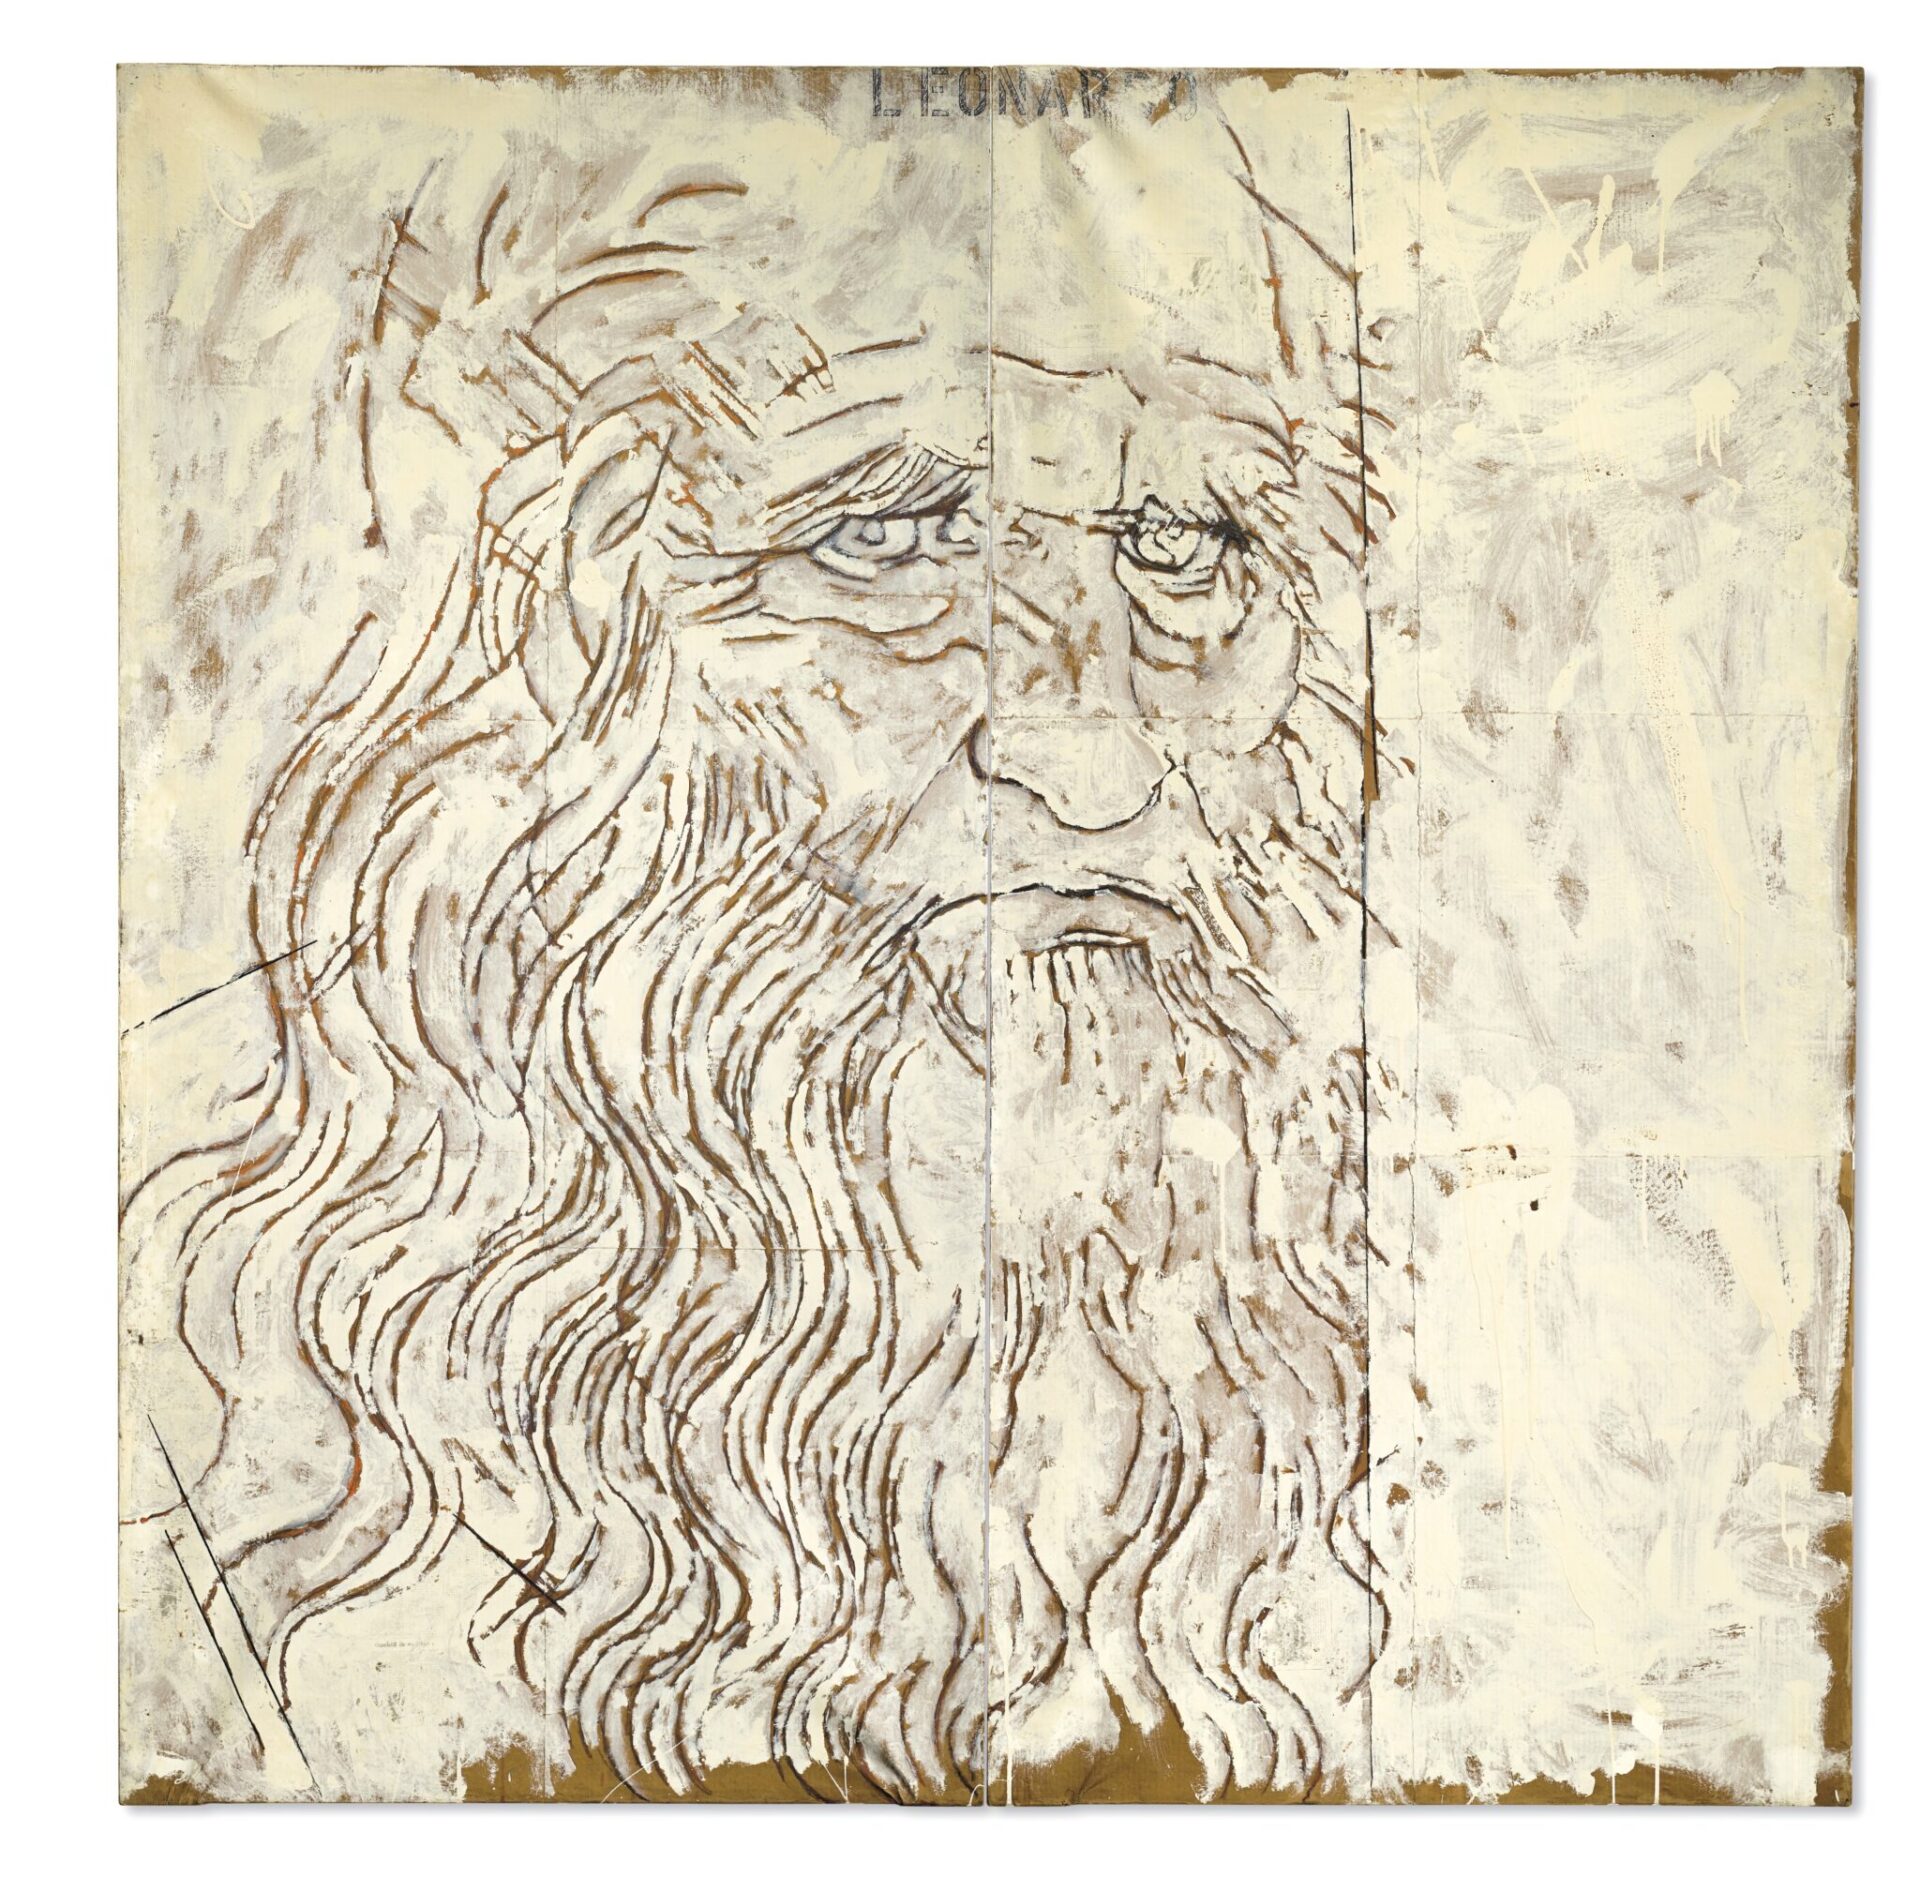 Schifano, Mario, 'Leonardo,' 1963 Enamel on paper laid down on two attached canvases 78 3/4 x 78 3/4 in (200 x 200 cm) Private Collection. © 2020 Artists Rights Society (ARS), New York / SIAE, Rome © Archivio Mario Schifano.